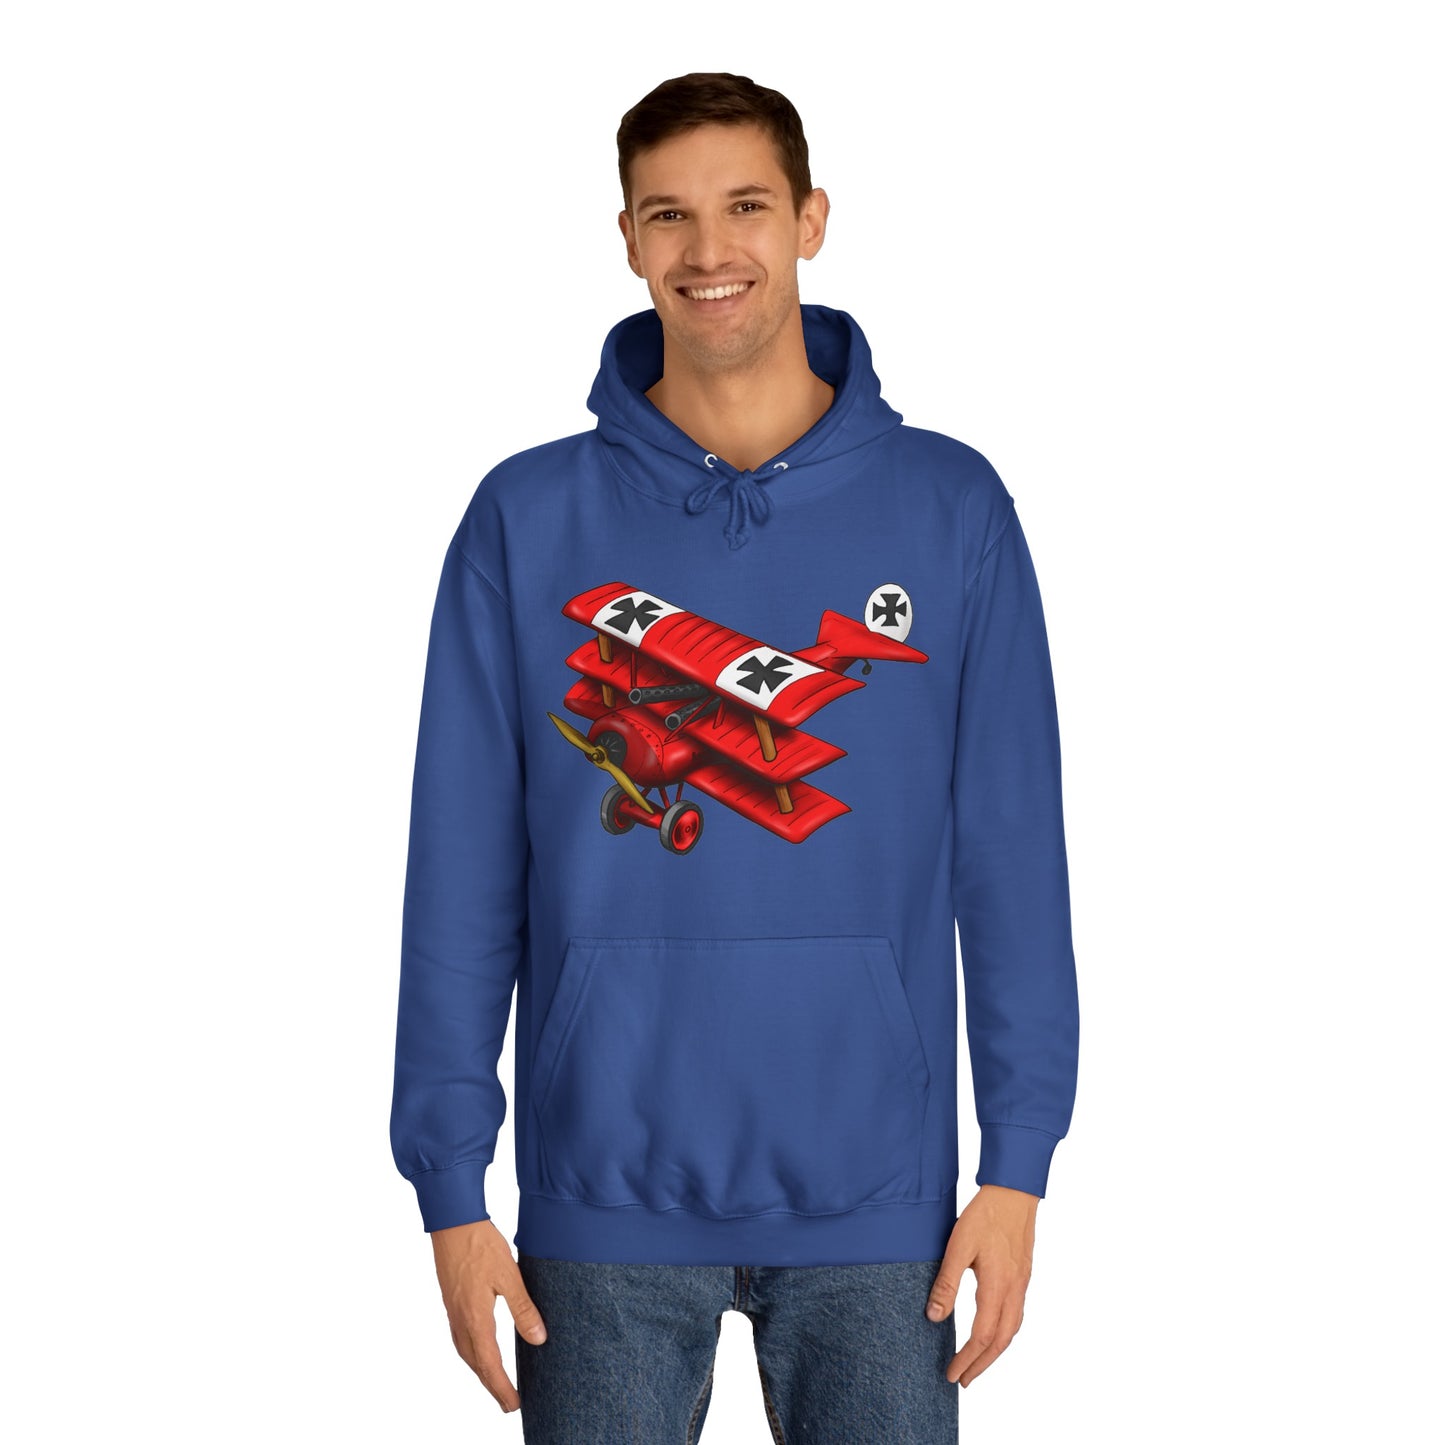 Red Baron Aircraft Design Unisex College Hoodie